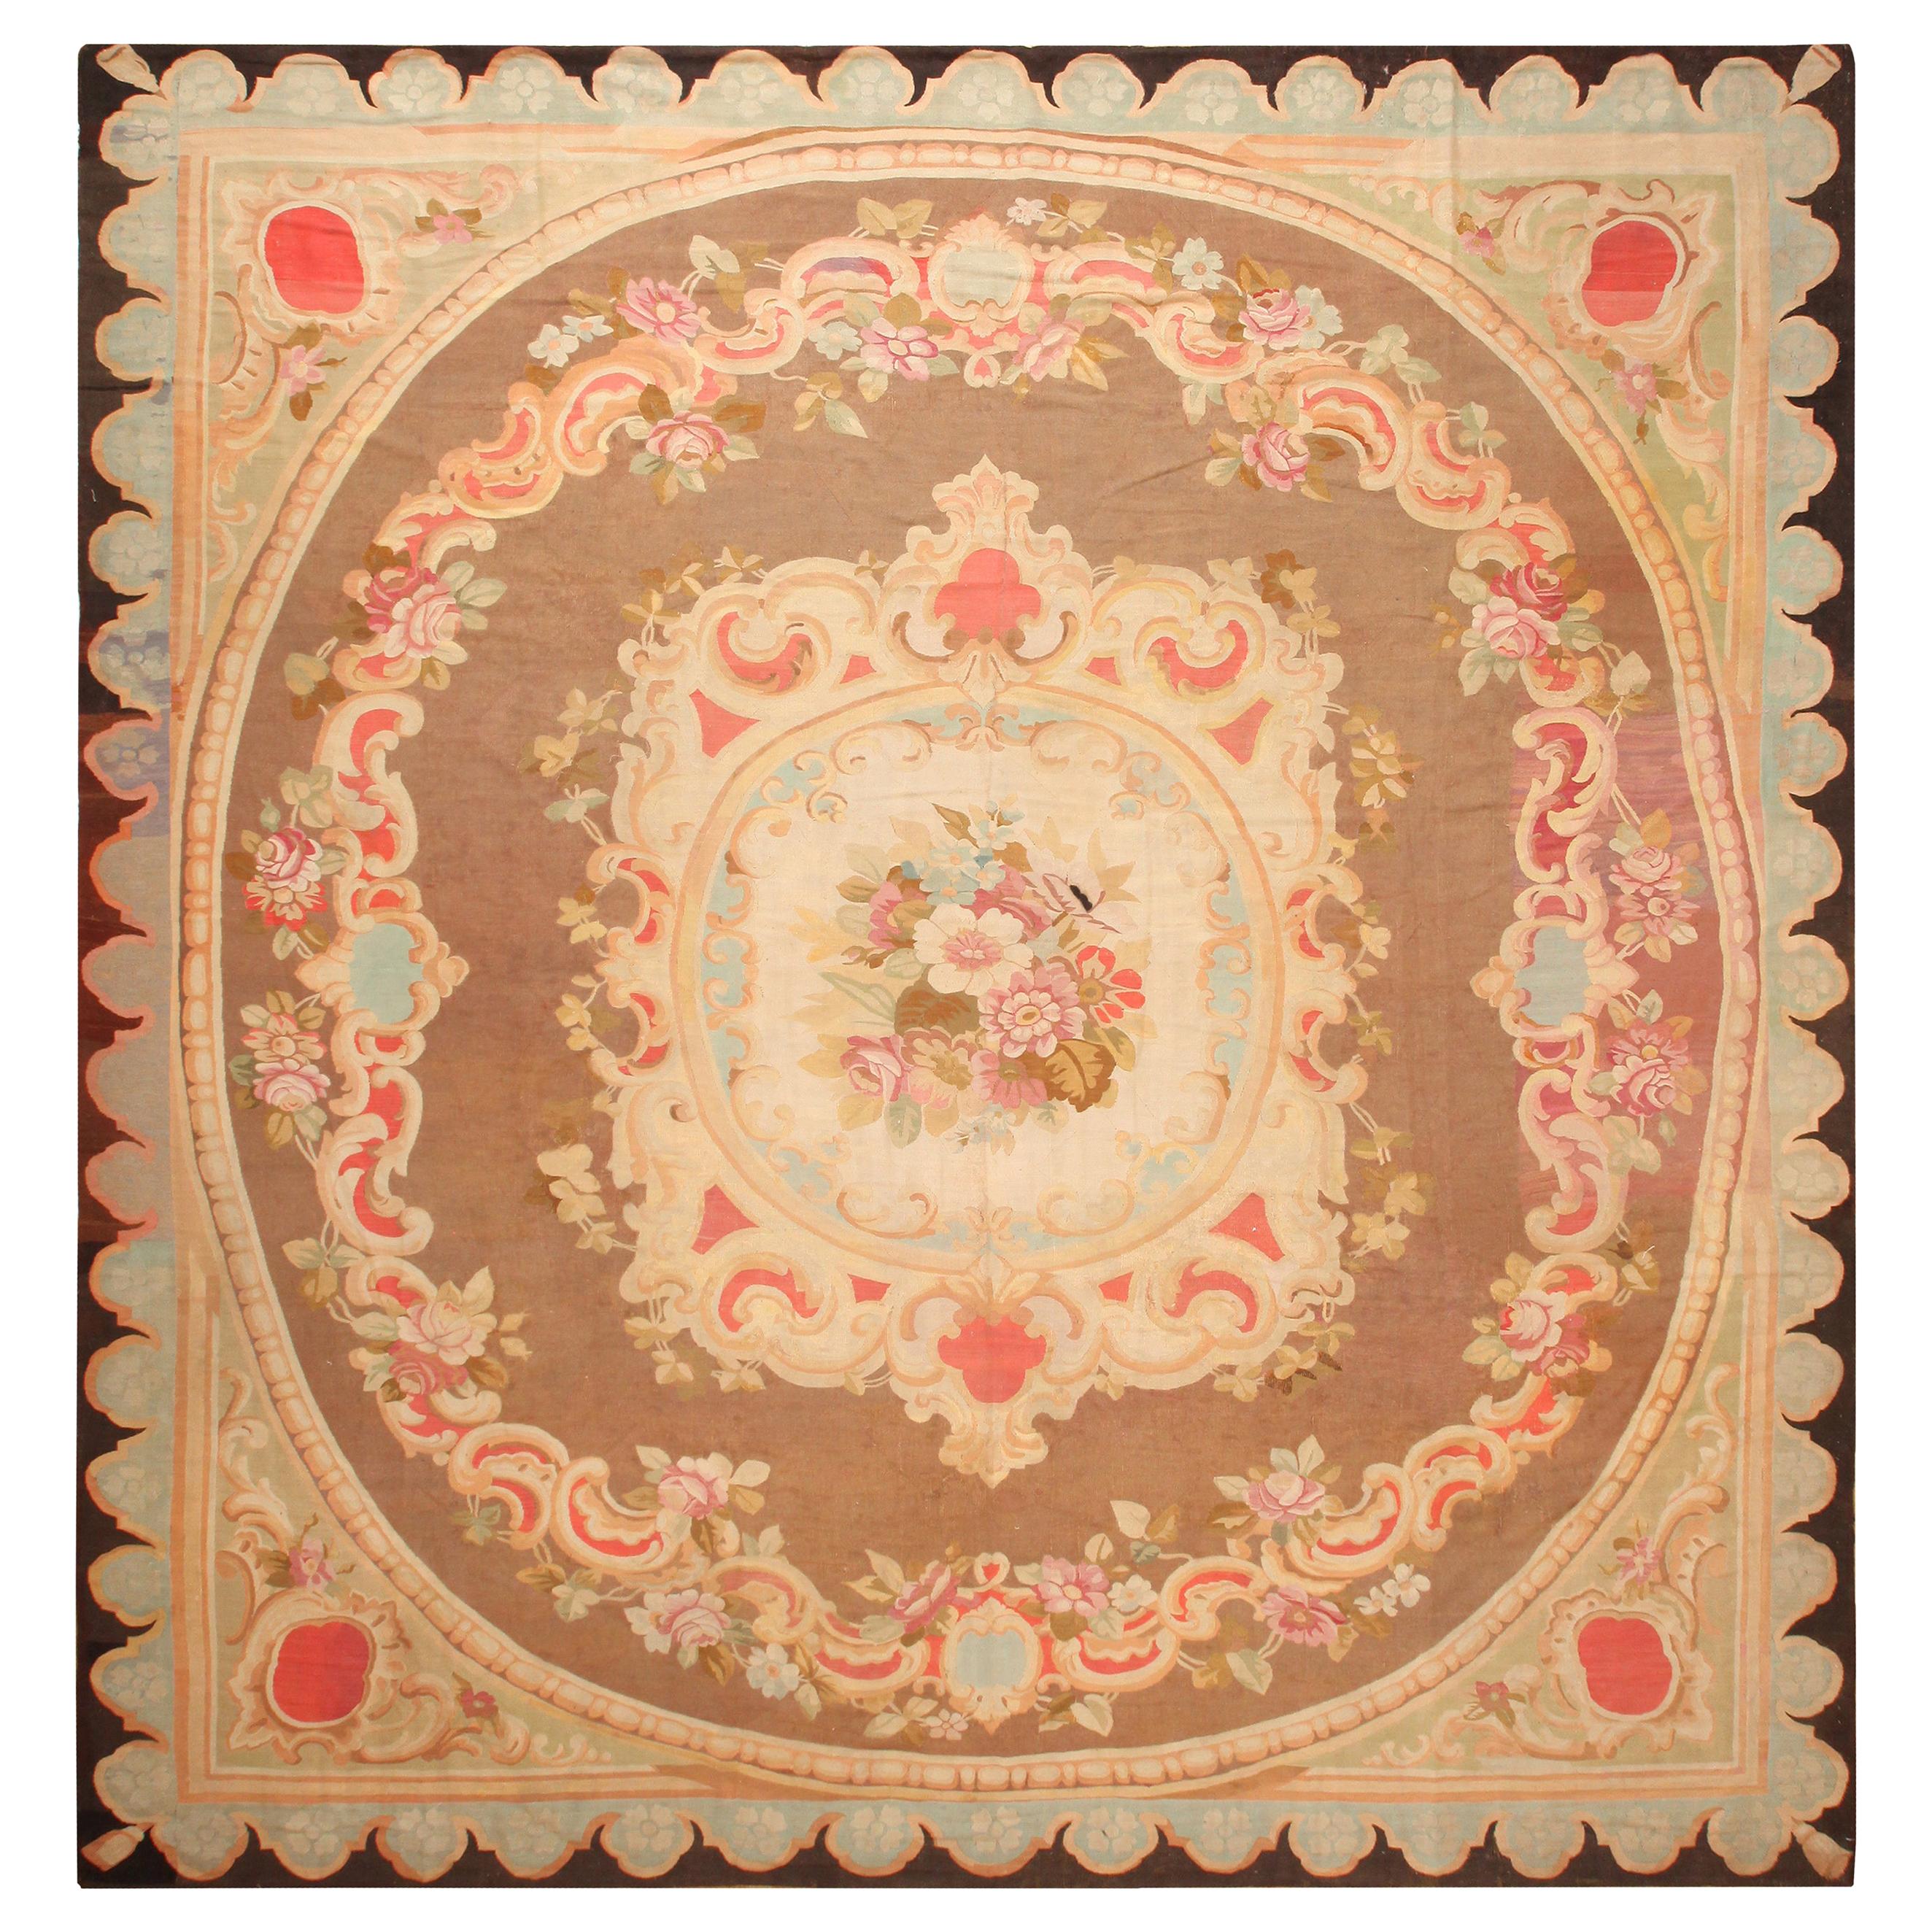 Antique French Aubusson Rug. 14 ft 8 in x 15 ft 2 in